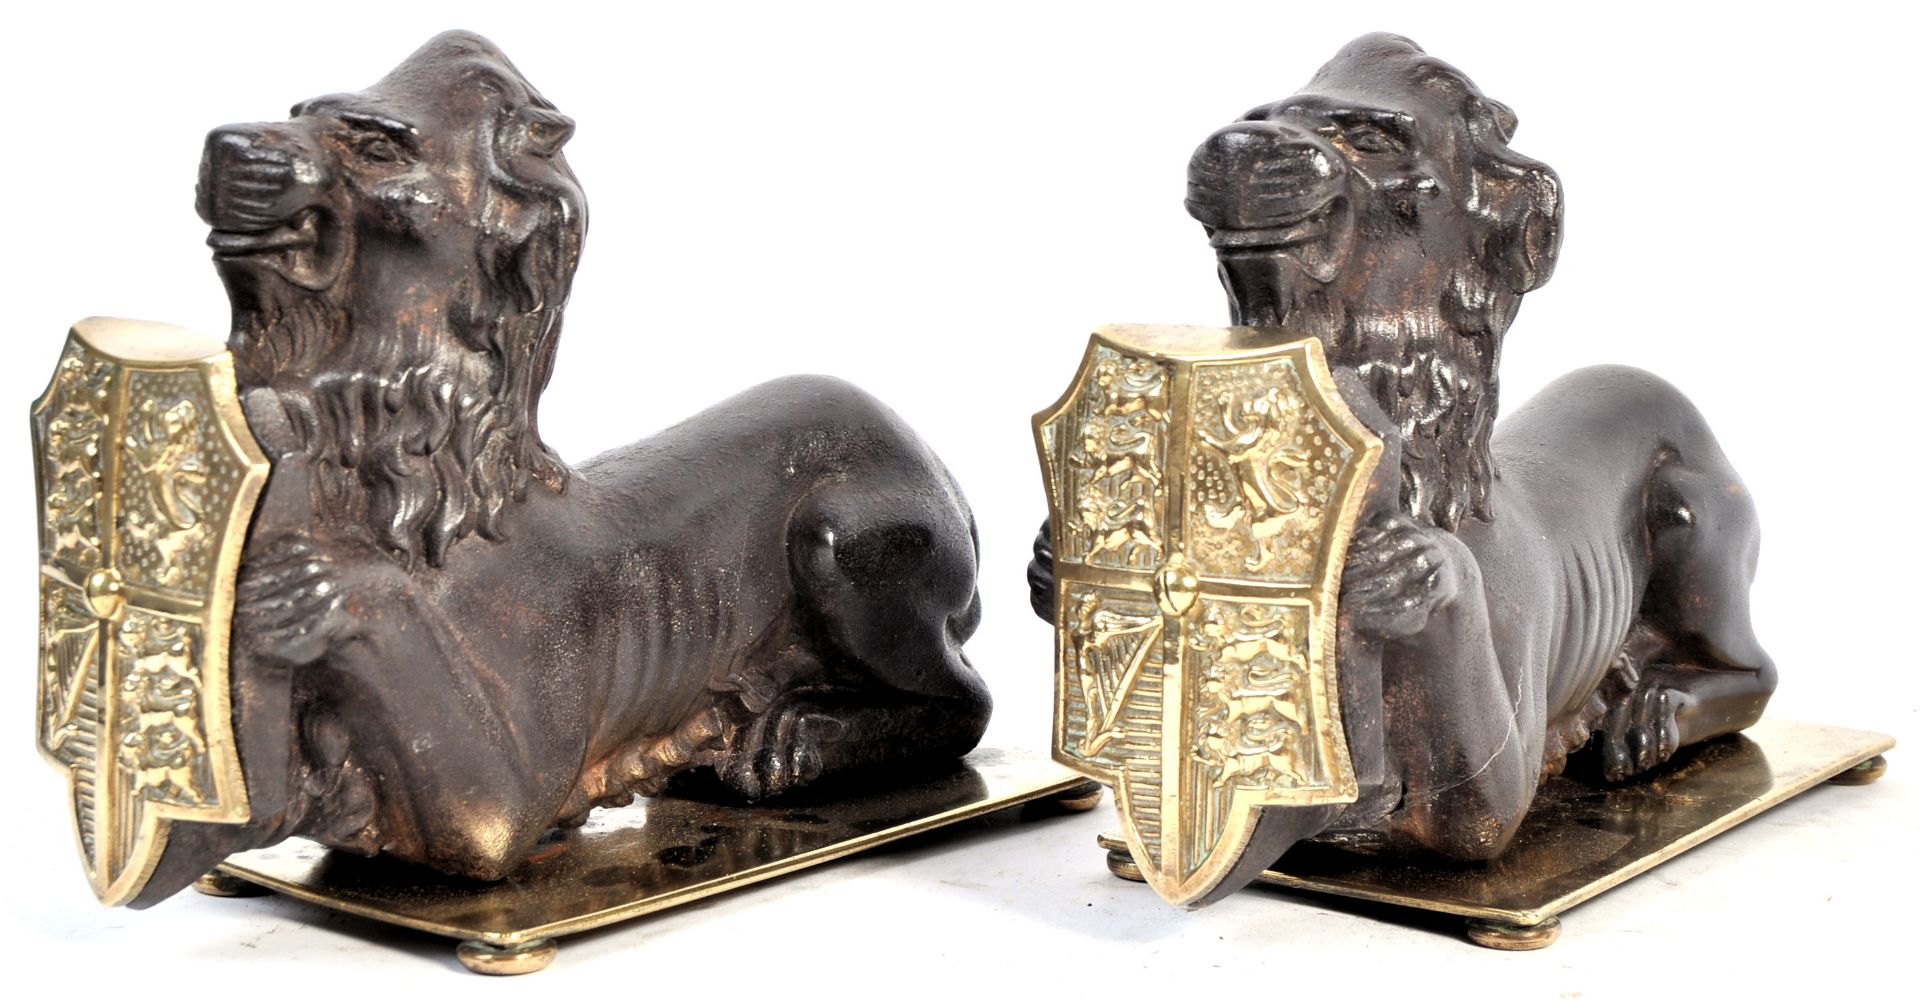 PAIR OF 19TH CENTURY CAST IRON FIRESIDE DOGS IN THE FROM OF LIONS